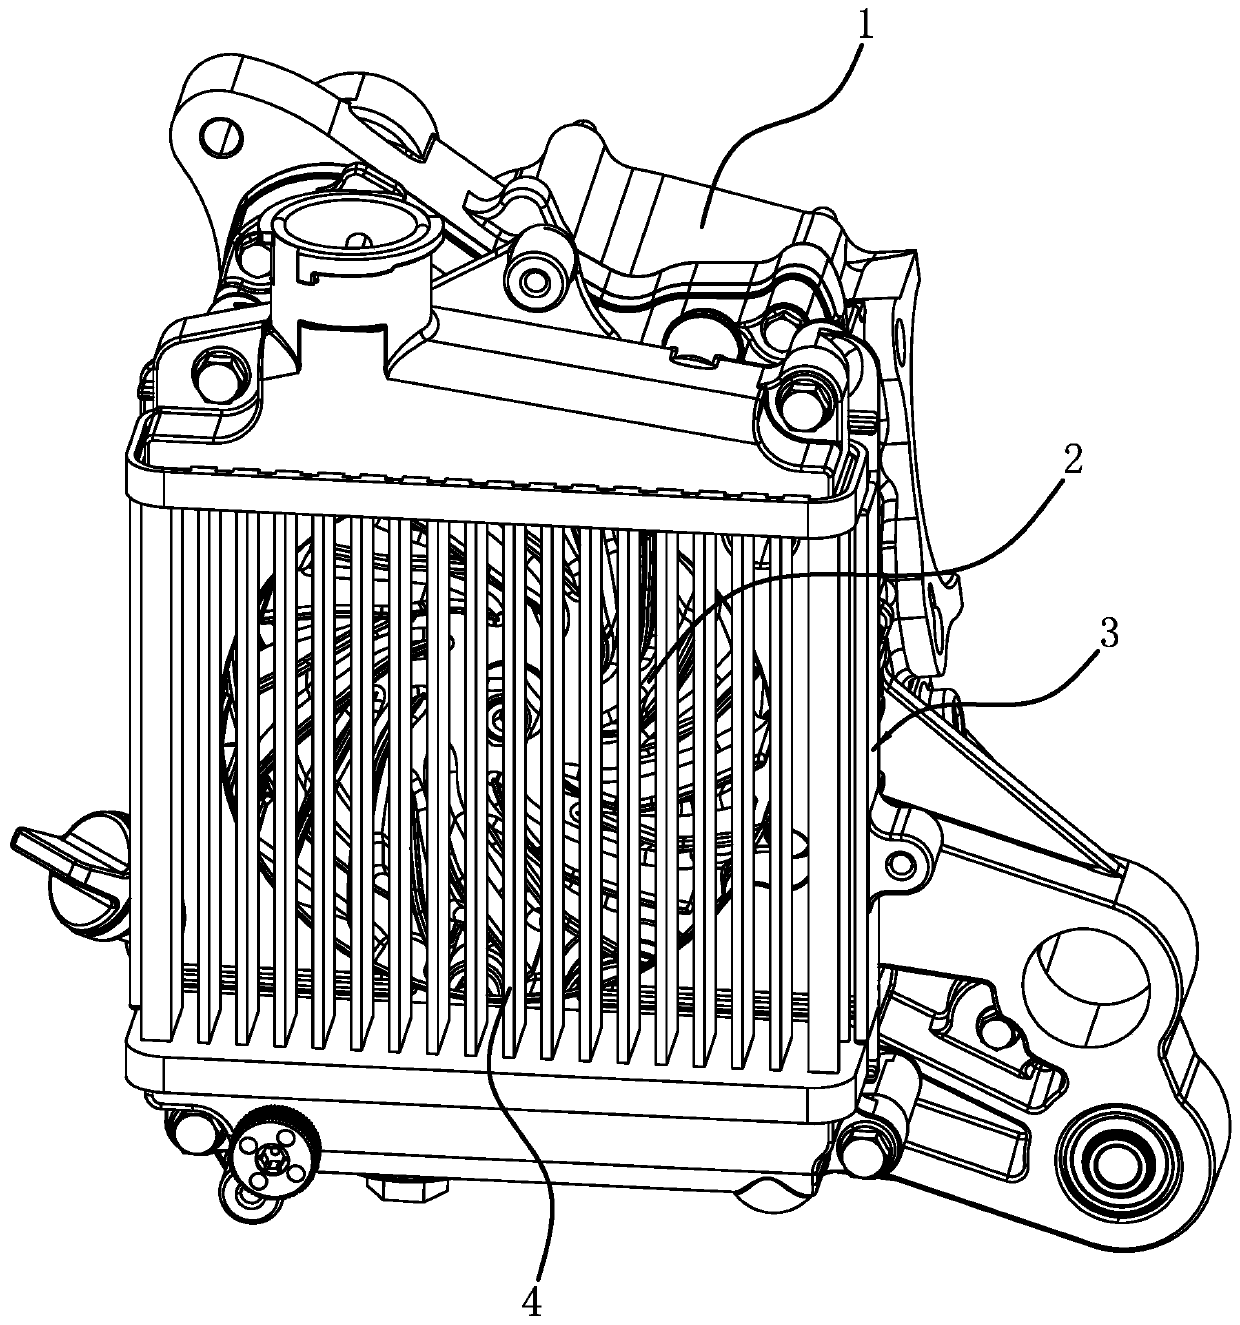 Water tank mounting structure of motorcycle engine